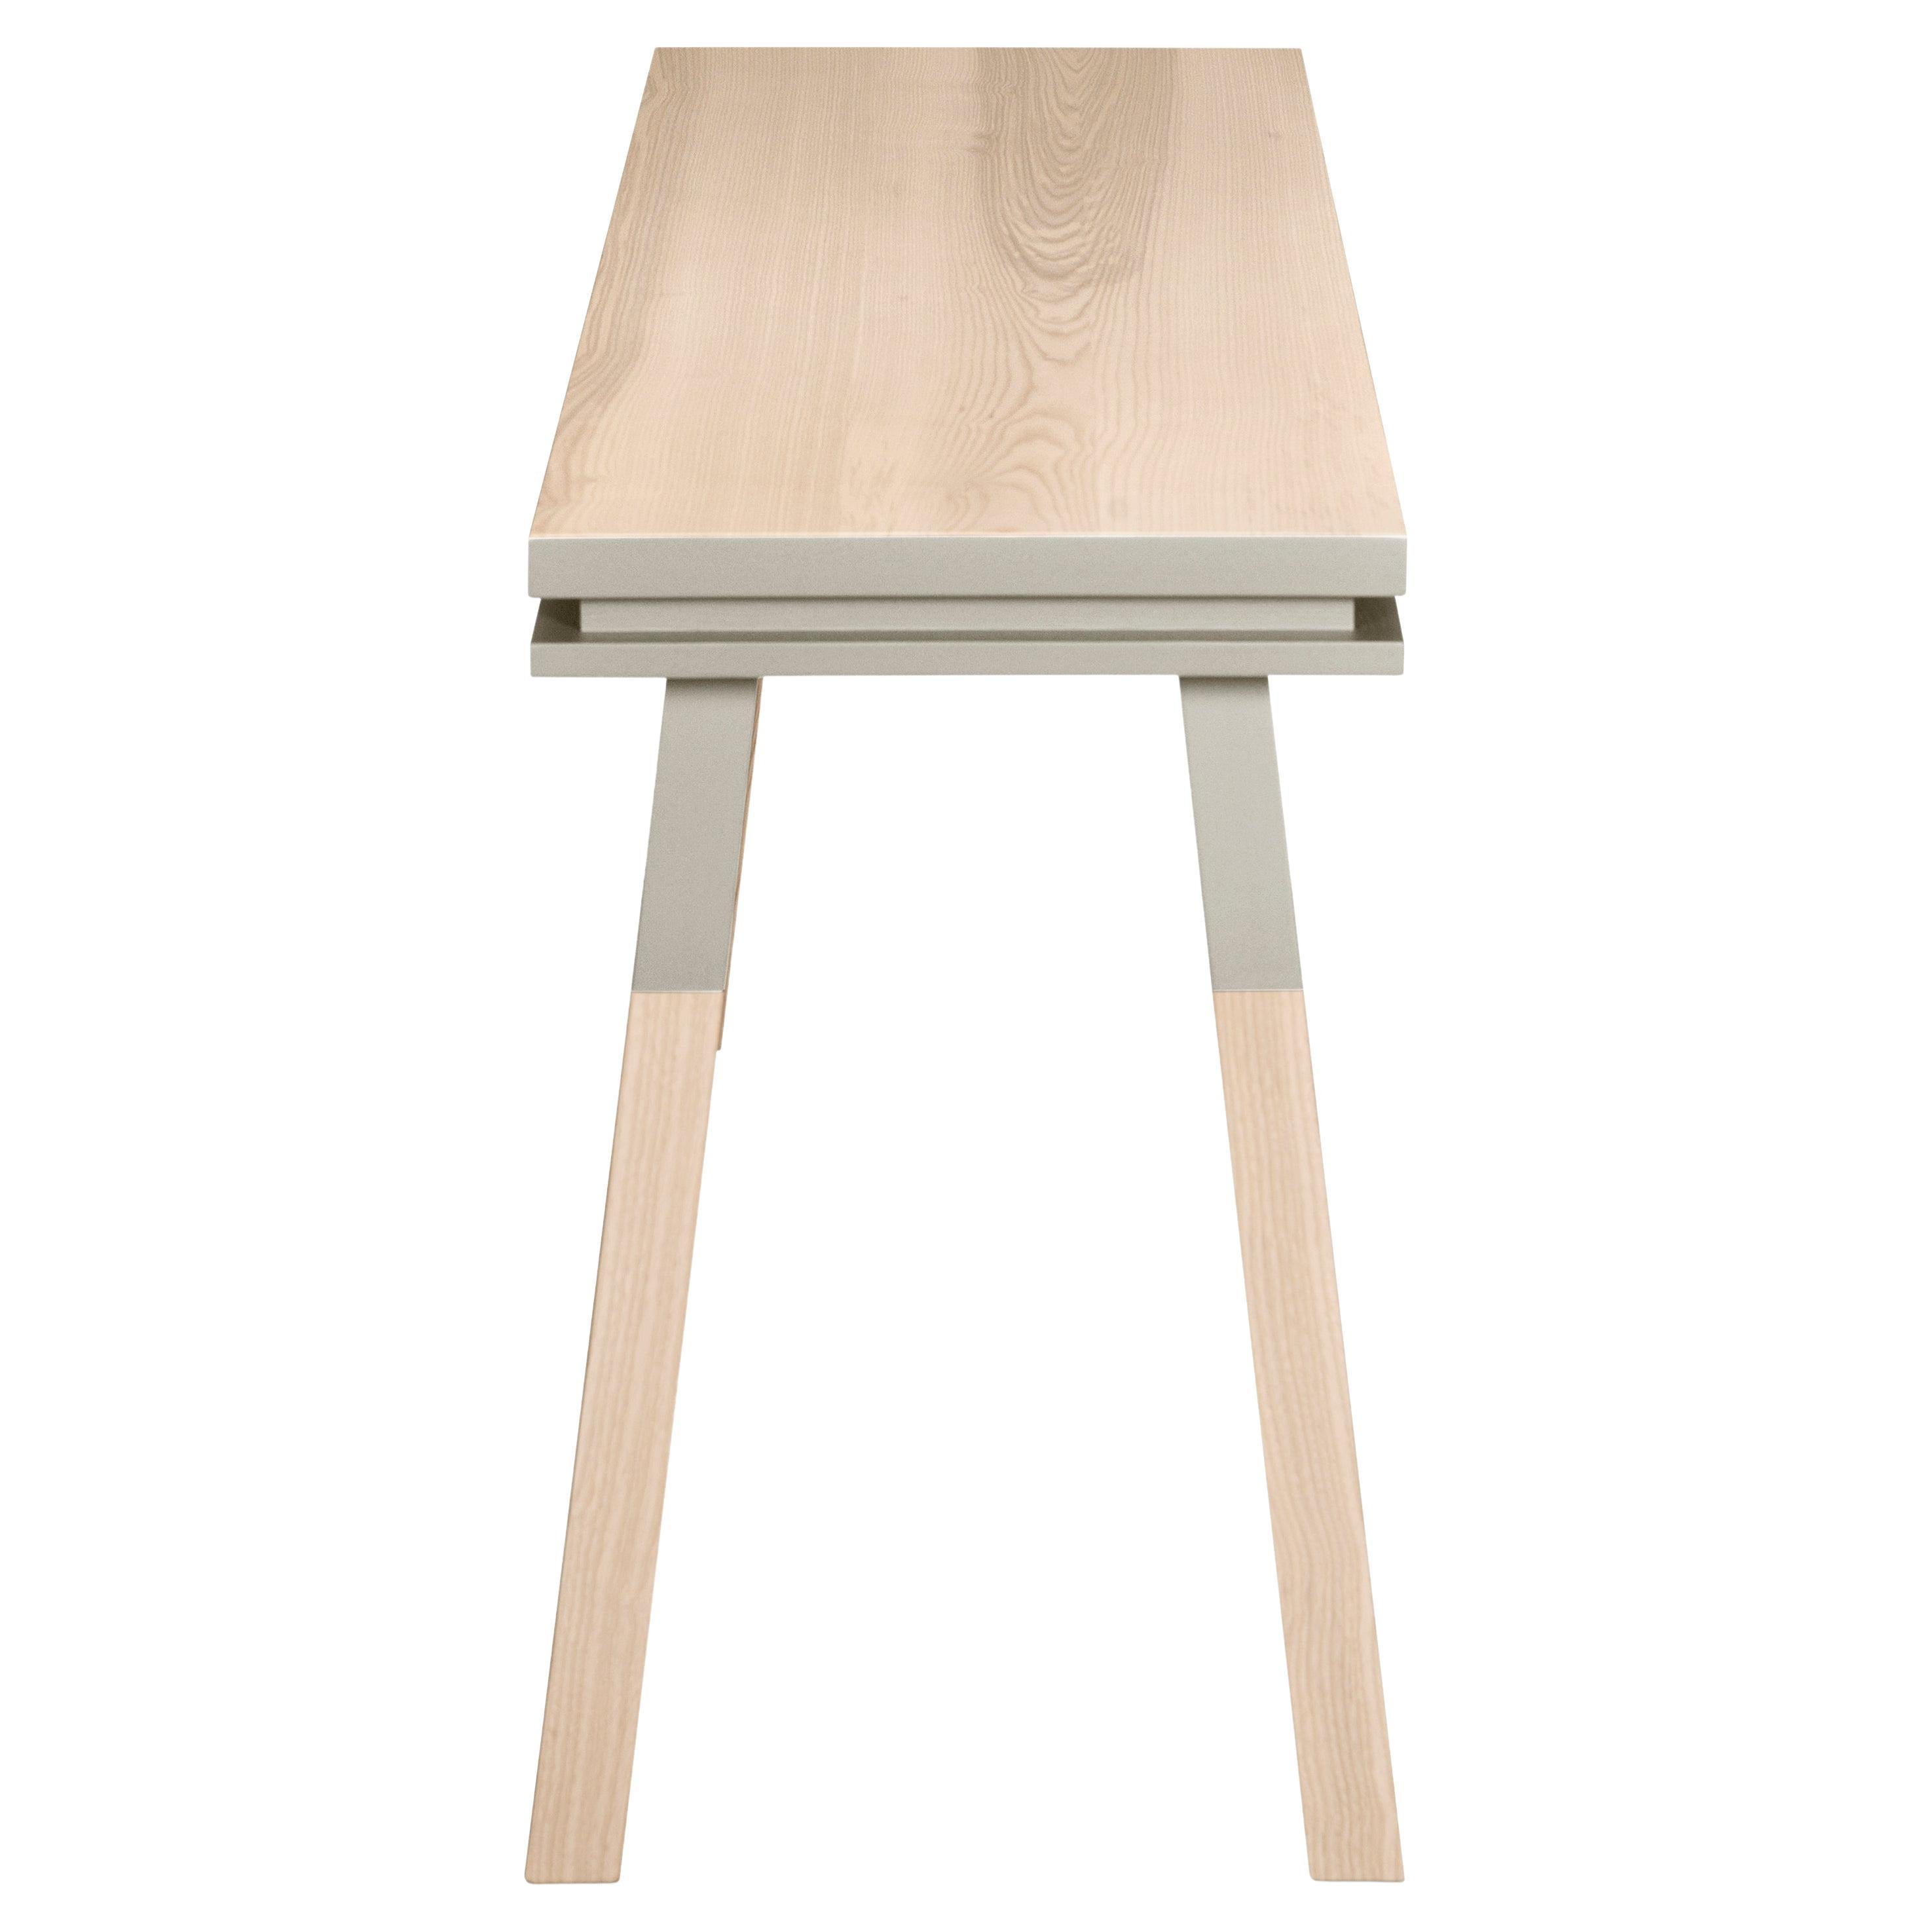 Grey table in solid wood, scandinavian design by E. Gizard, Paris - craft made